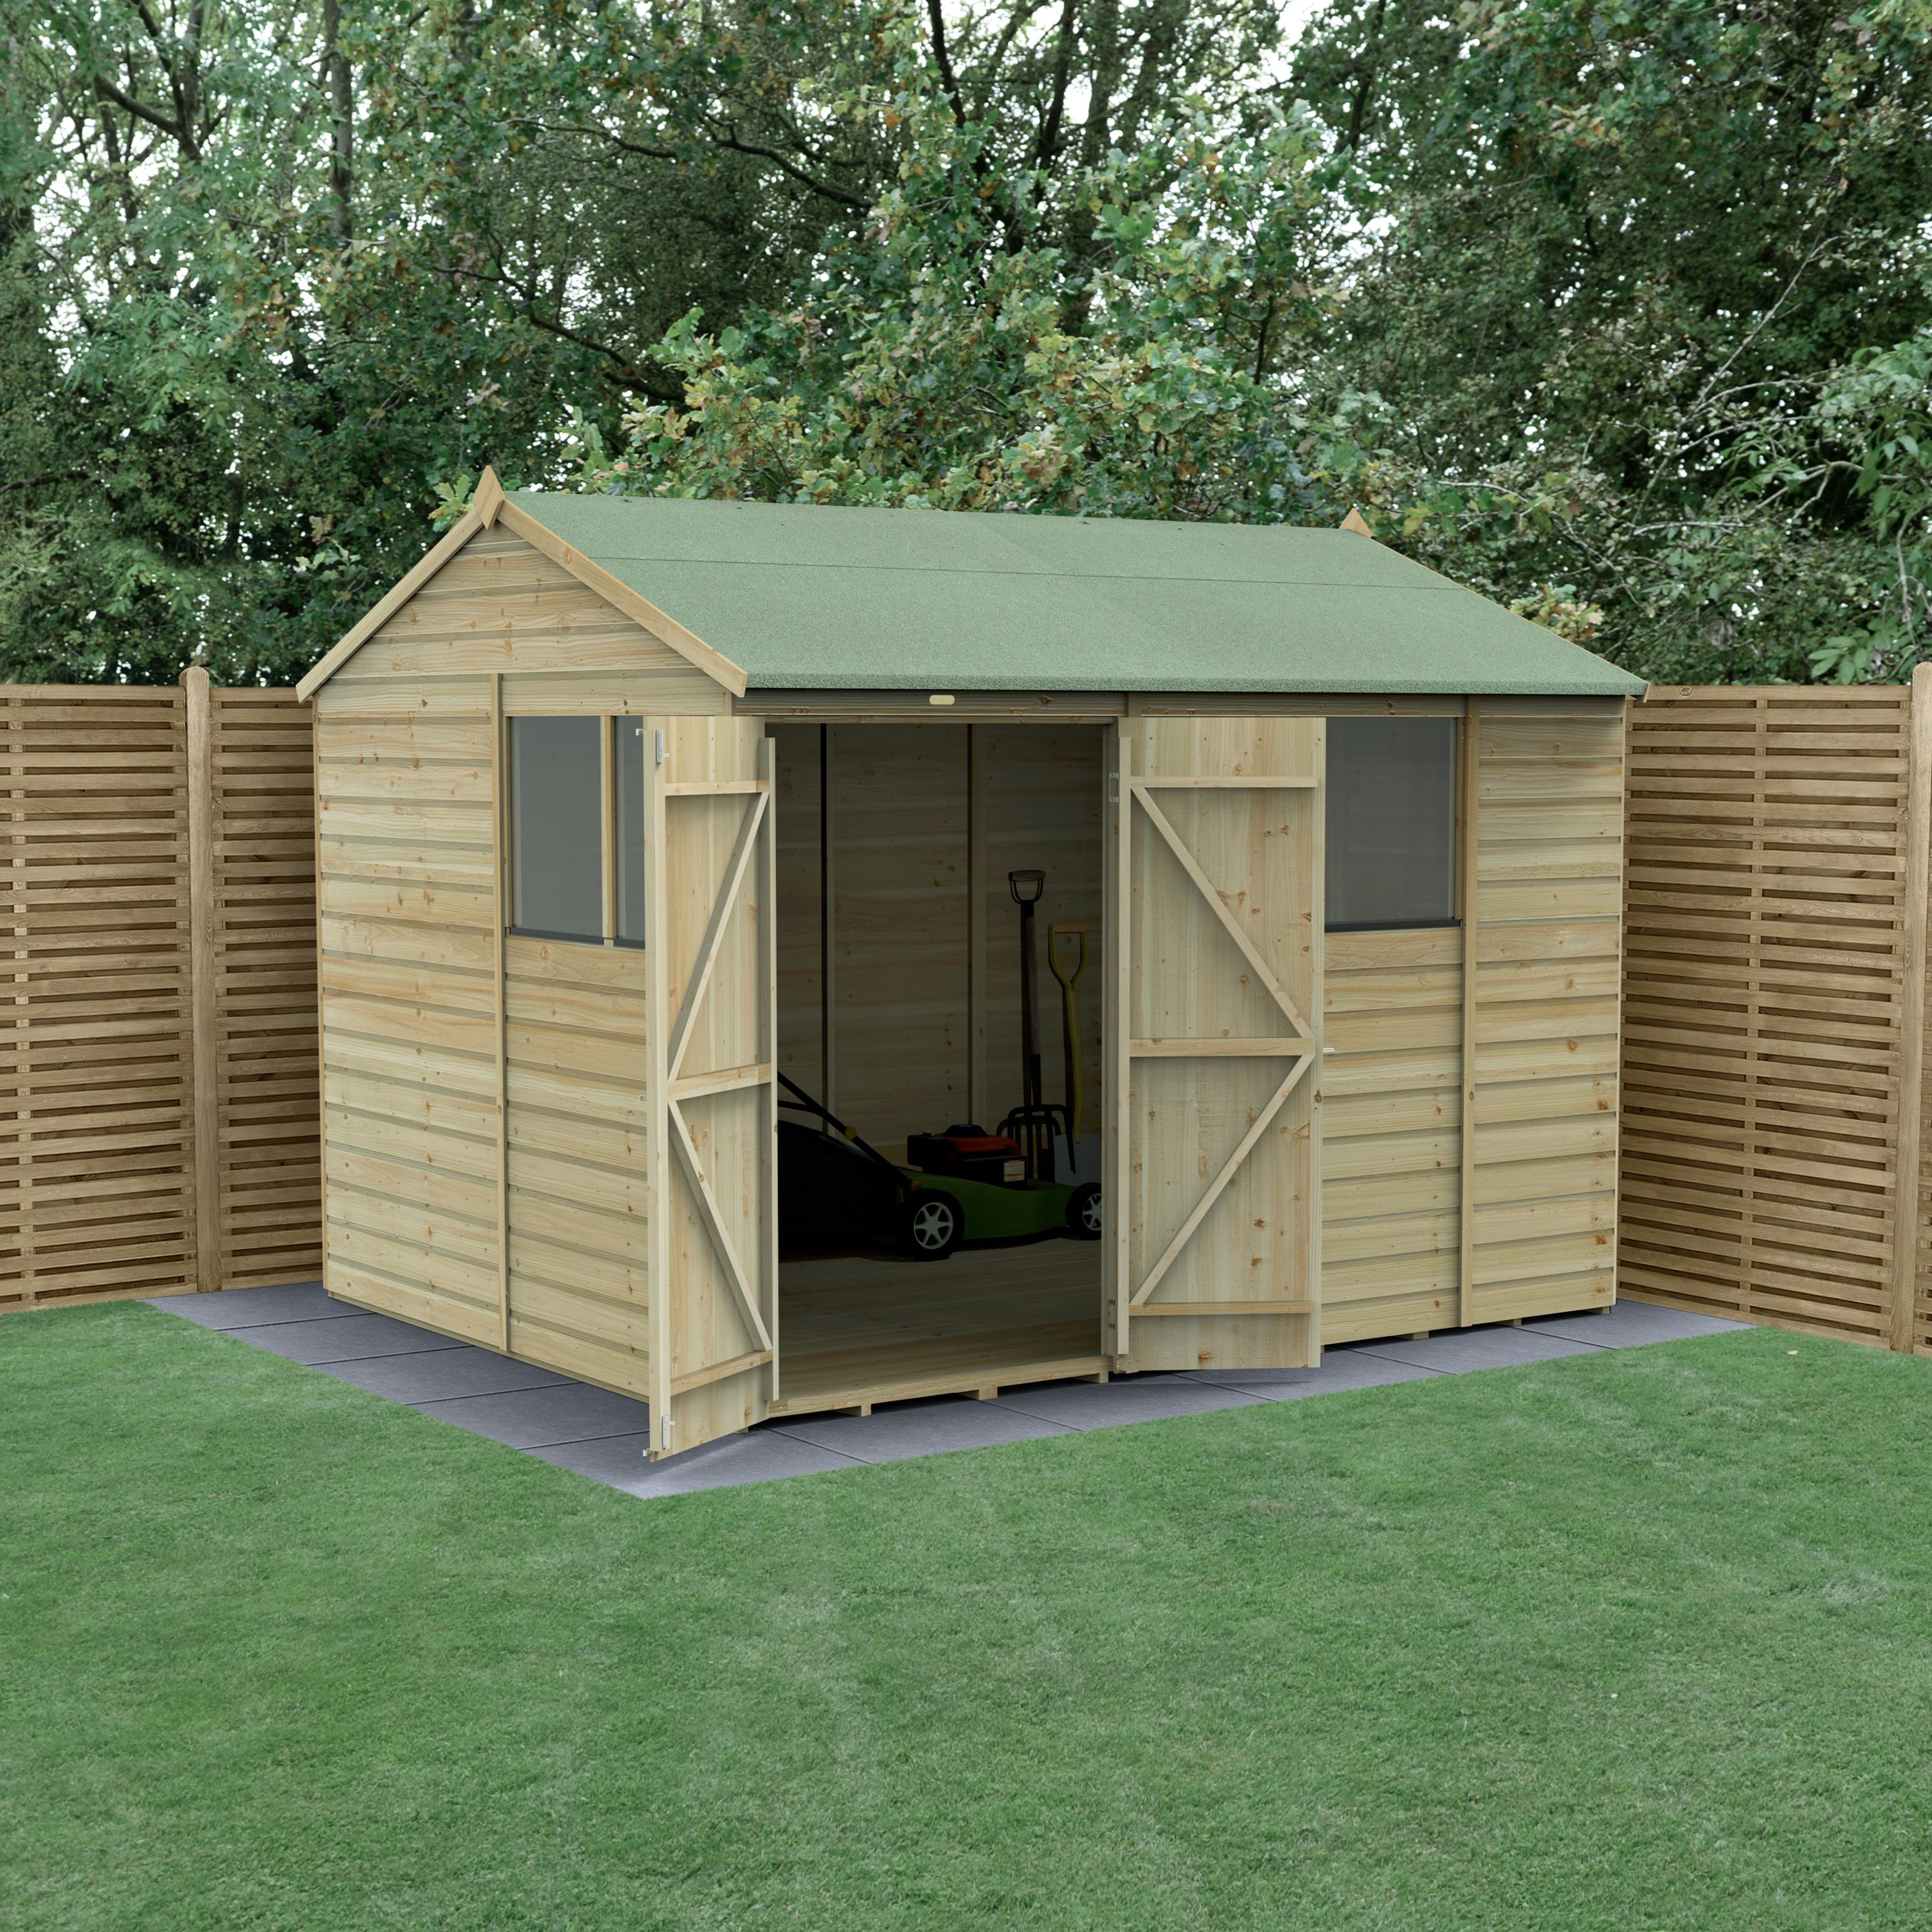 Forest Garden Beckwood Shiplap 10x8 ft Reverse apex Natural timber Wooden Pressure treated 2 door Shed with floor & 4 windows - Assembly service included